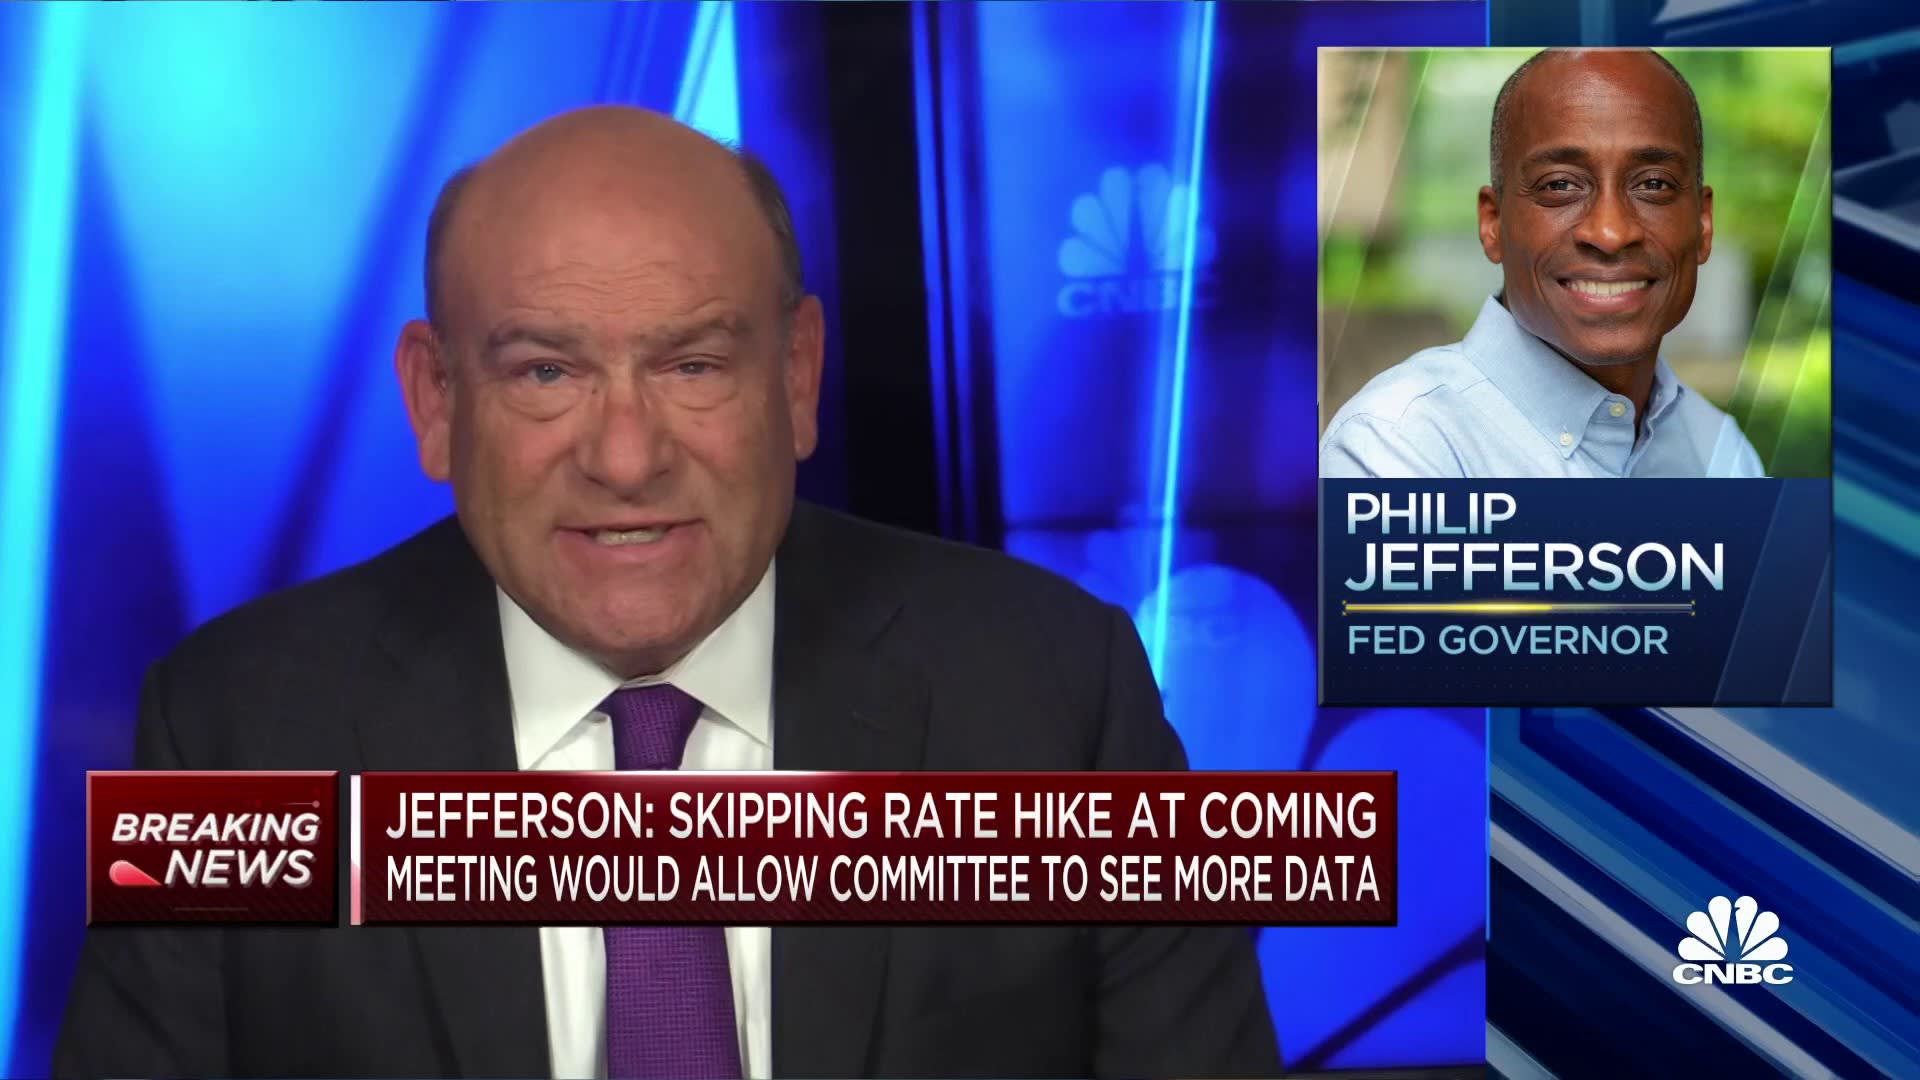 Fed Gov. Jefferson: Skipping rate hike at the coming meeting would allow committee to see more data